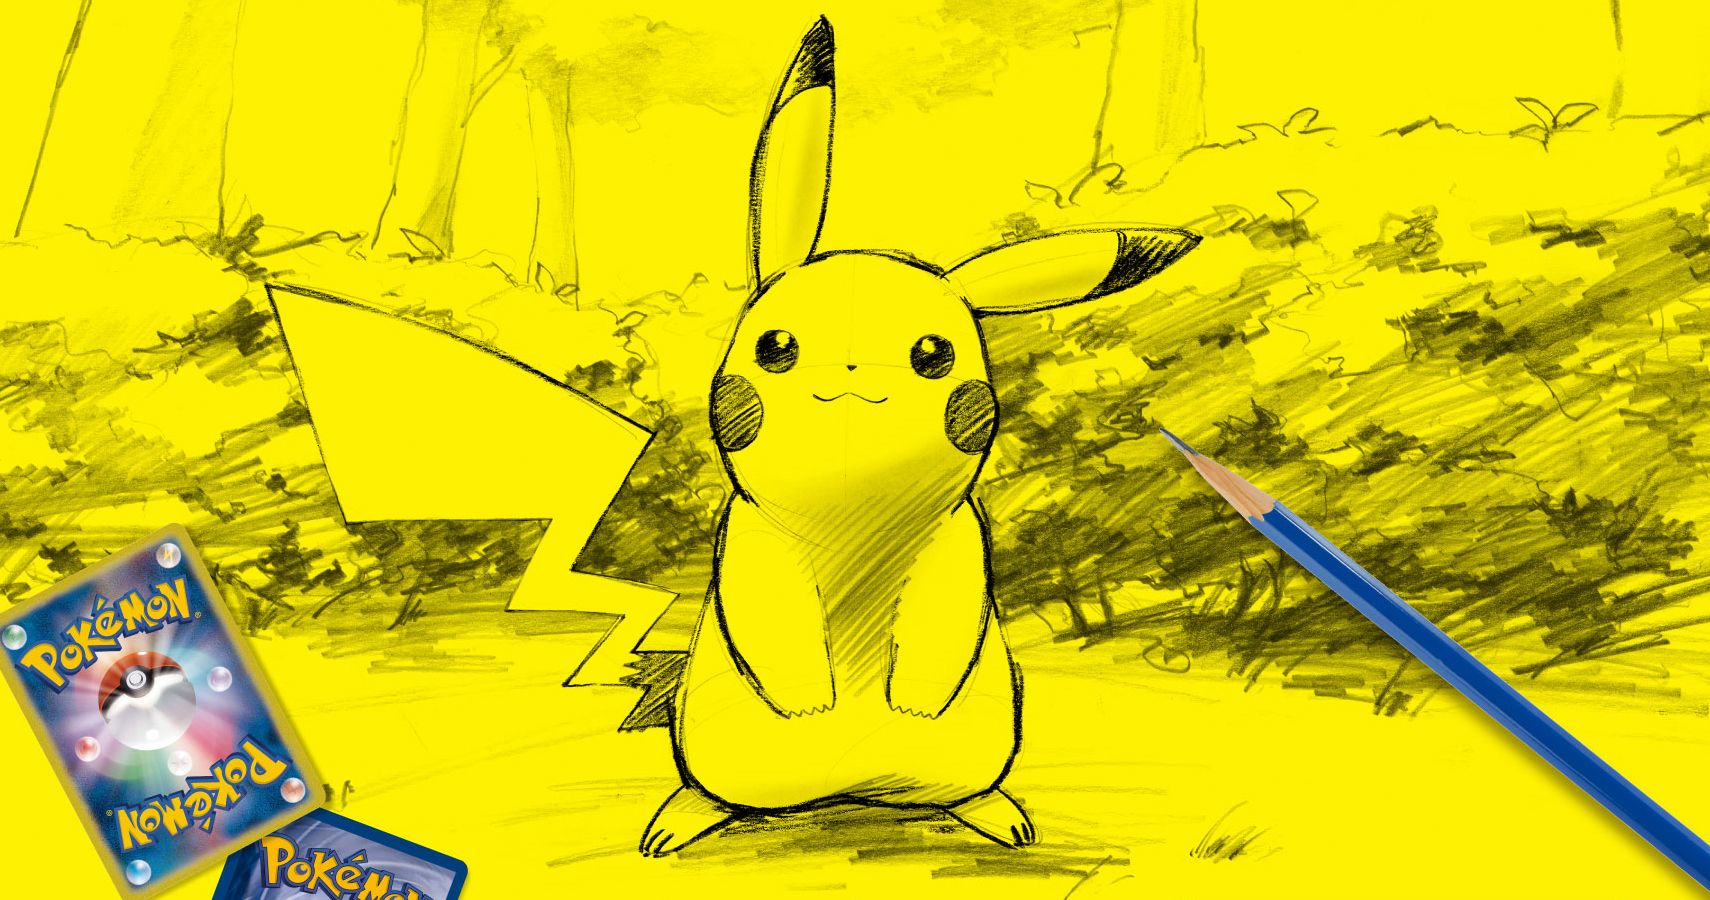 Pokemon Trading Card Game Illustration Contest Opens Up To US Entries For The First Time